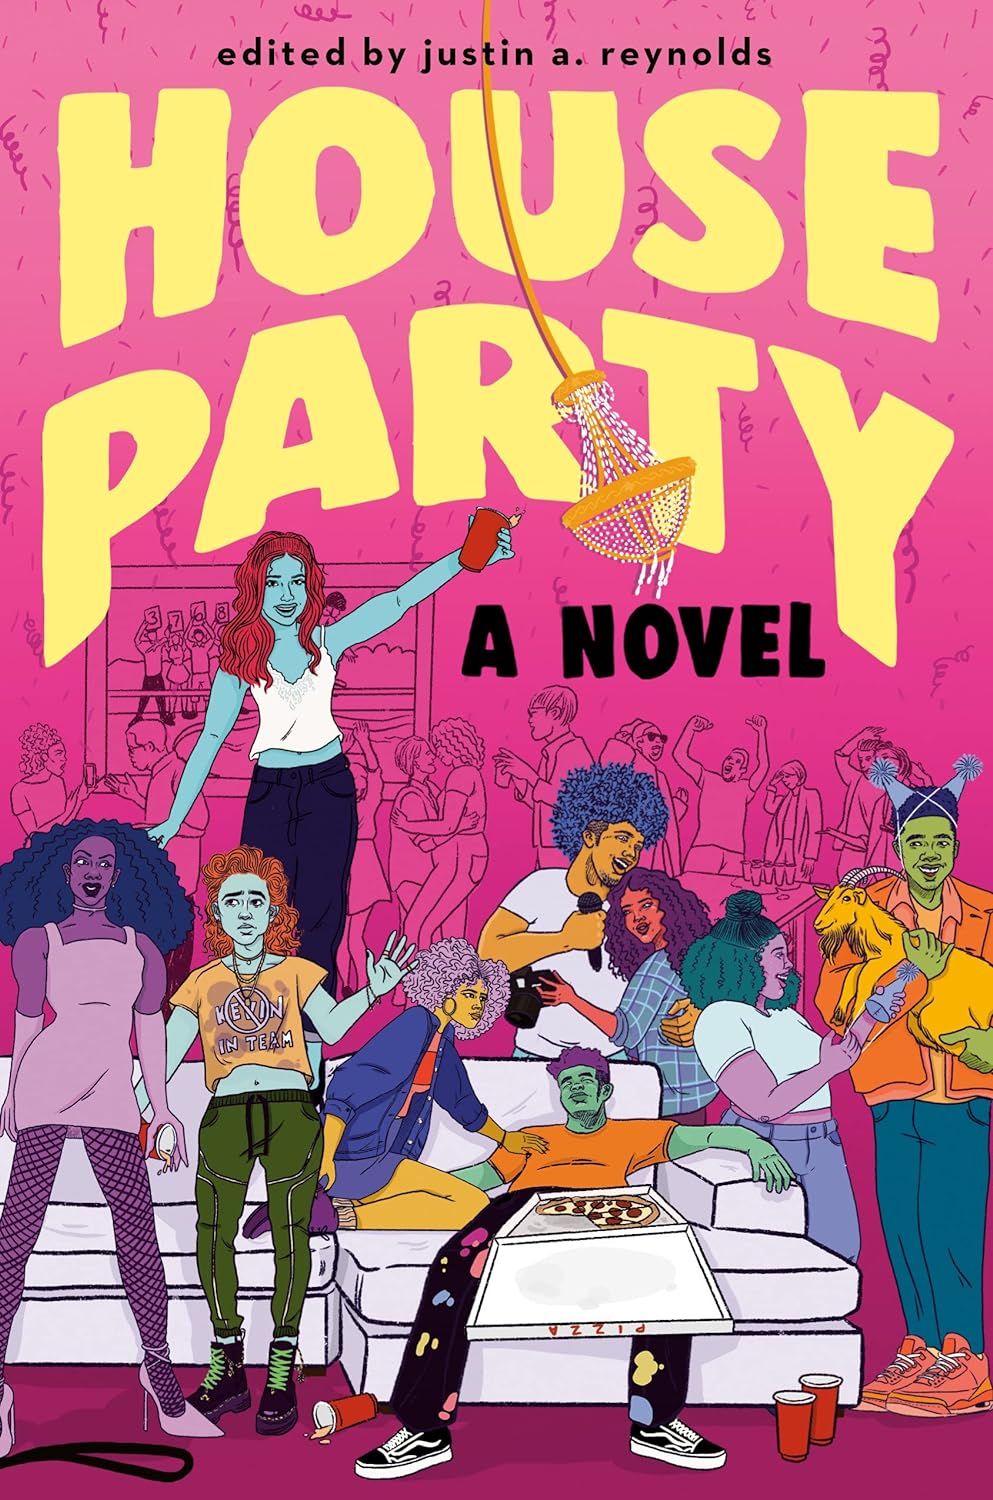 Book Cover Image of House Party by justin a. reynolds